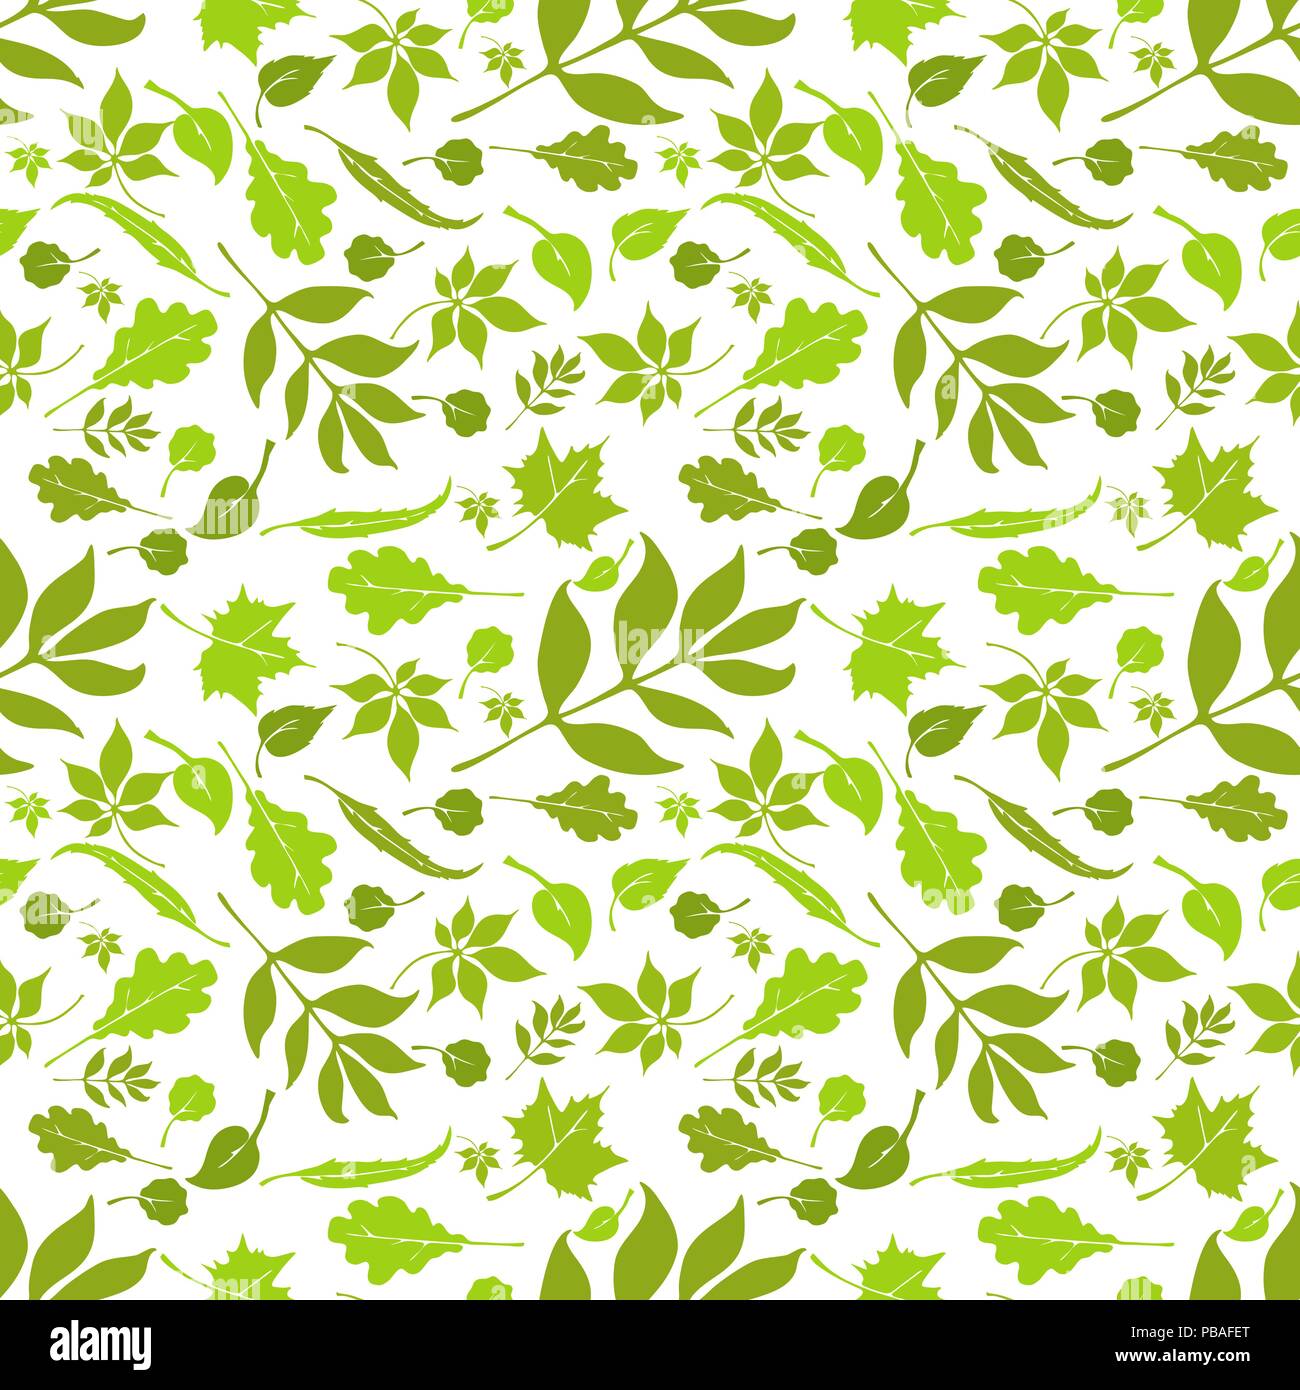 Russian forest seamless pattern. Camouflage fabric.  European trees design. Oak, linden, birch, chestnut, willow, alder, ash and maple leaves. Vector  Stock Vector